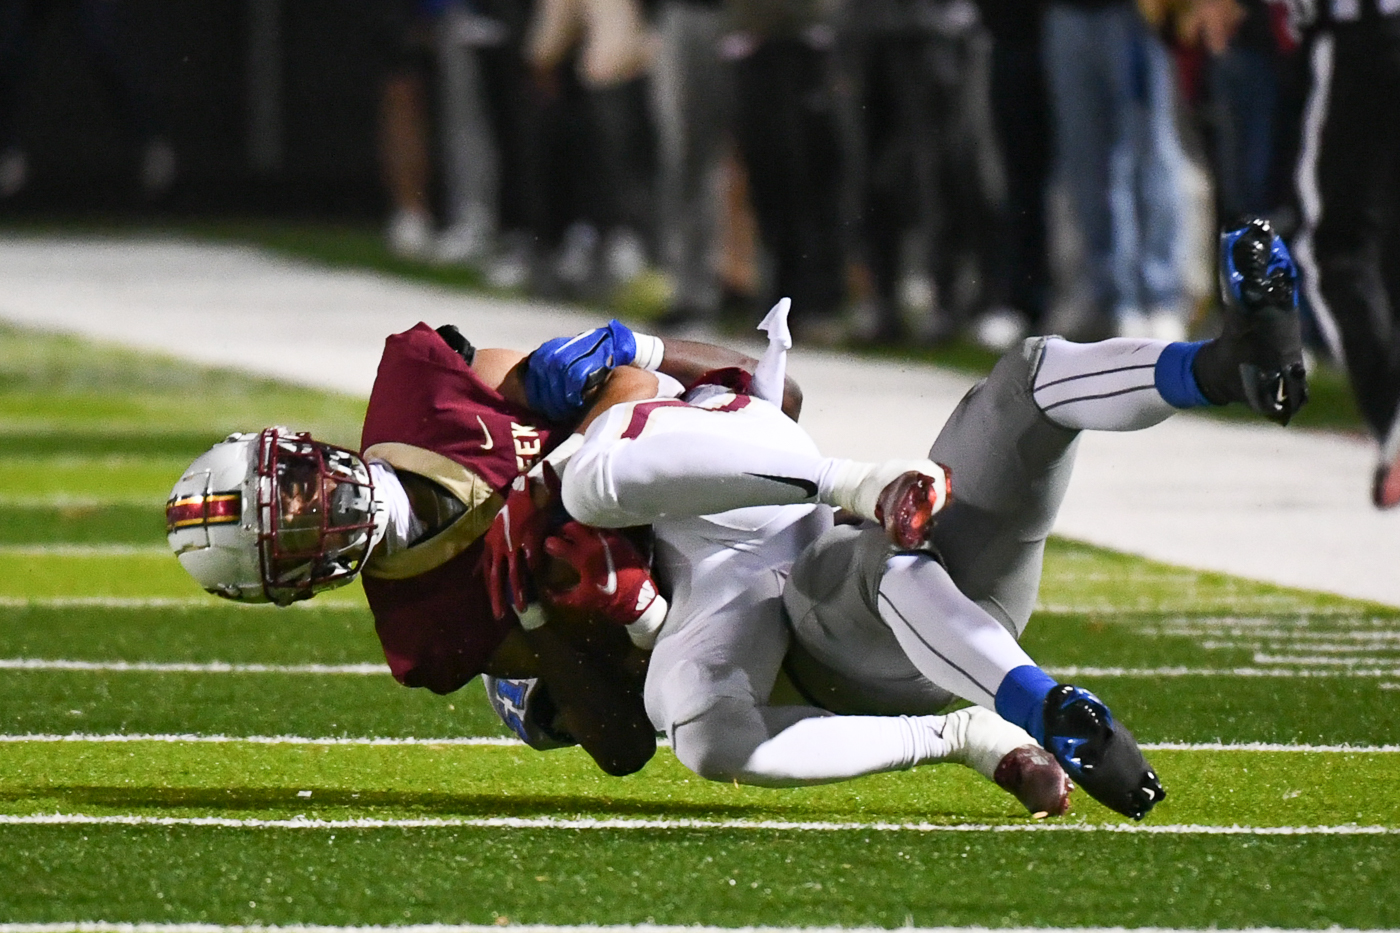 4 Questions with Mill Creek wide receiver/defensive back Trajen Greco